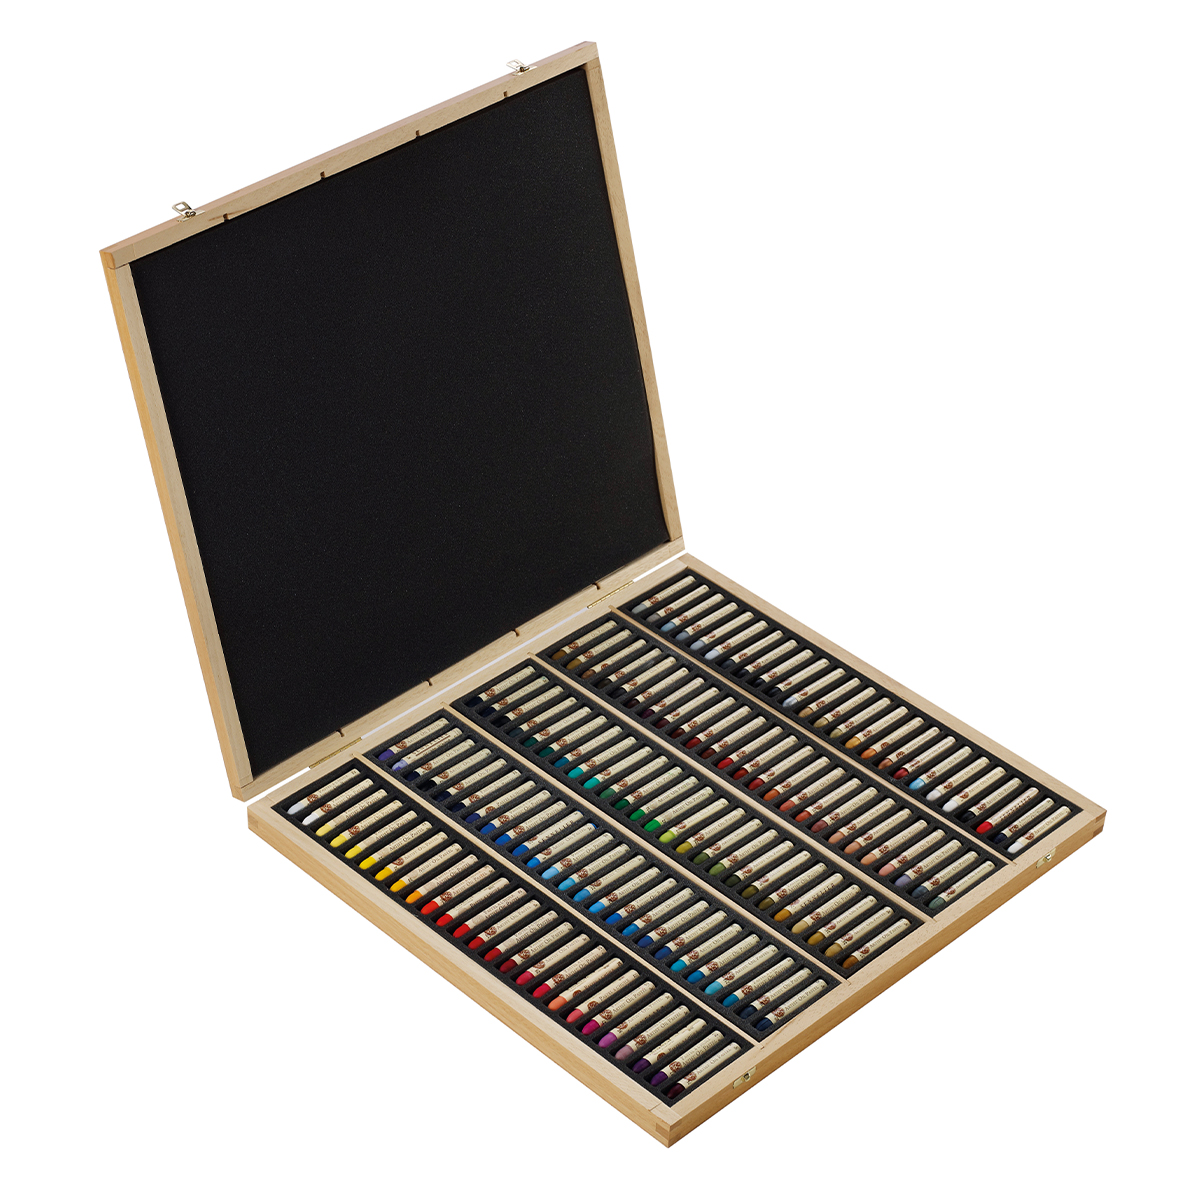 Sennelier French Artists' Watercolor Set - Iridescent Pastel